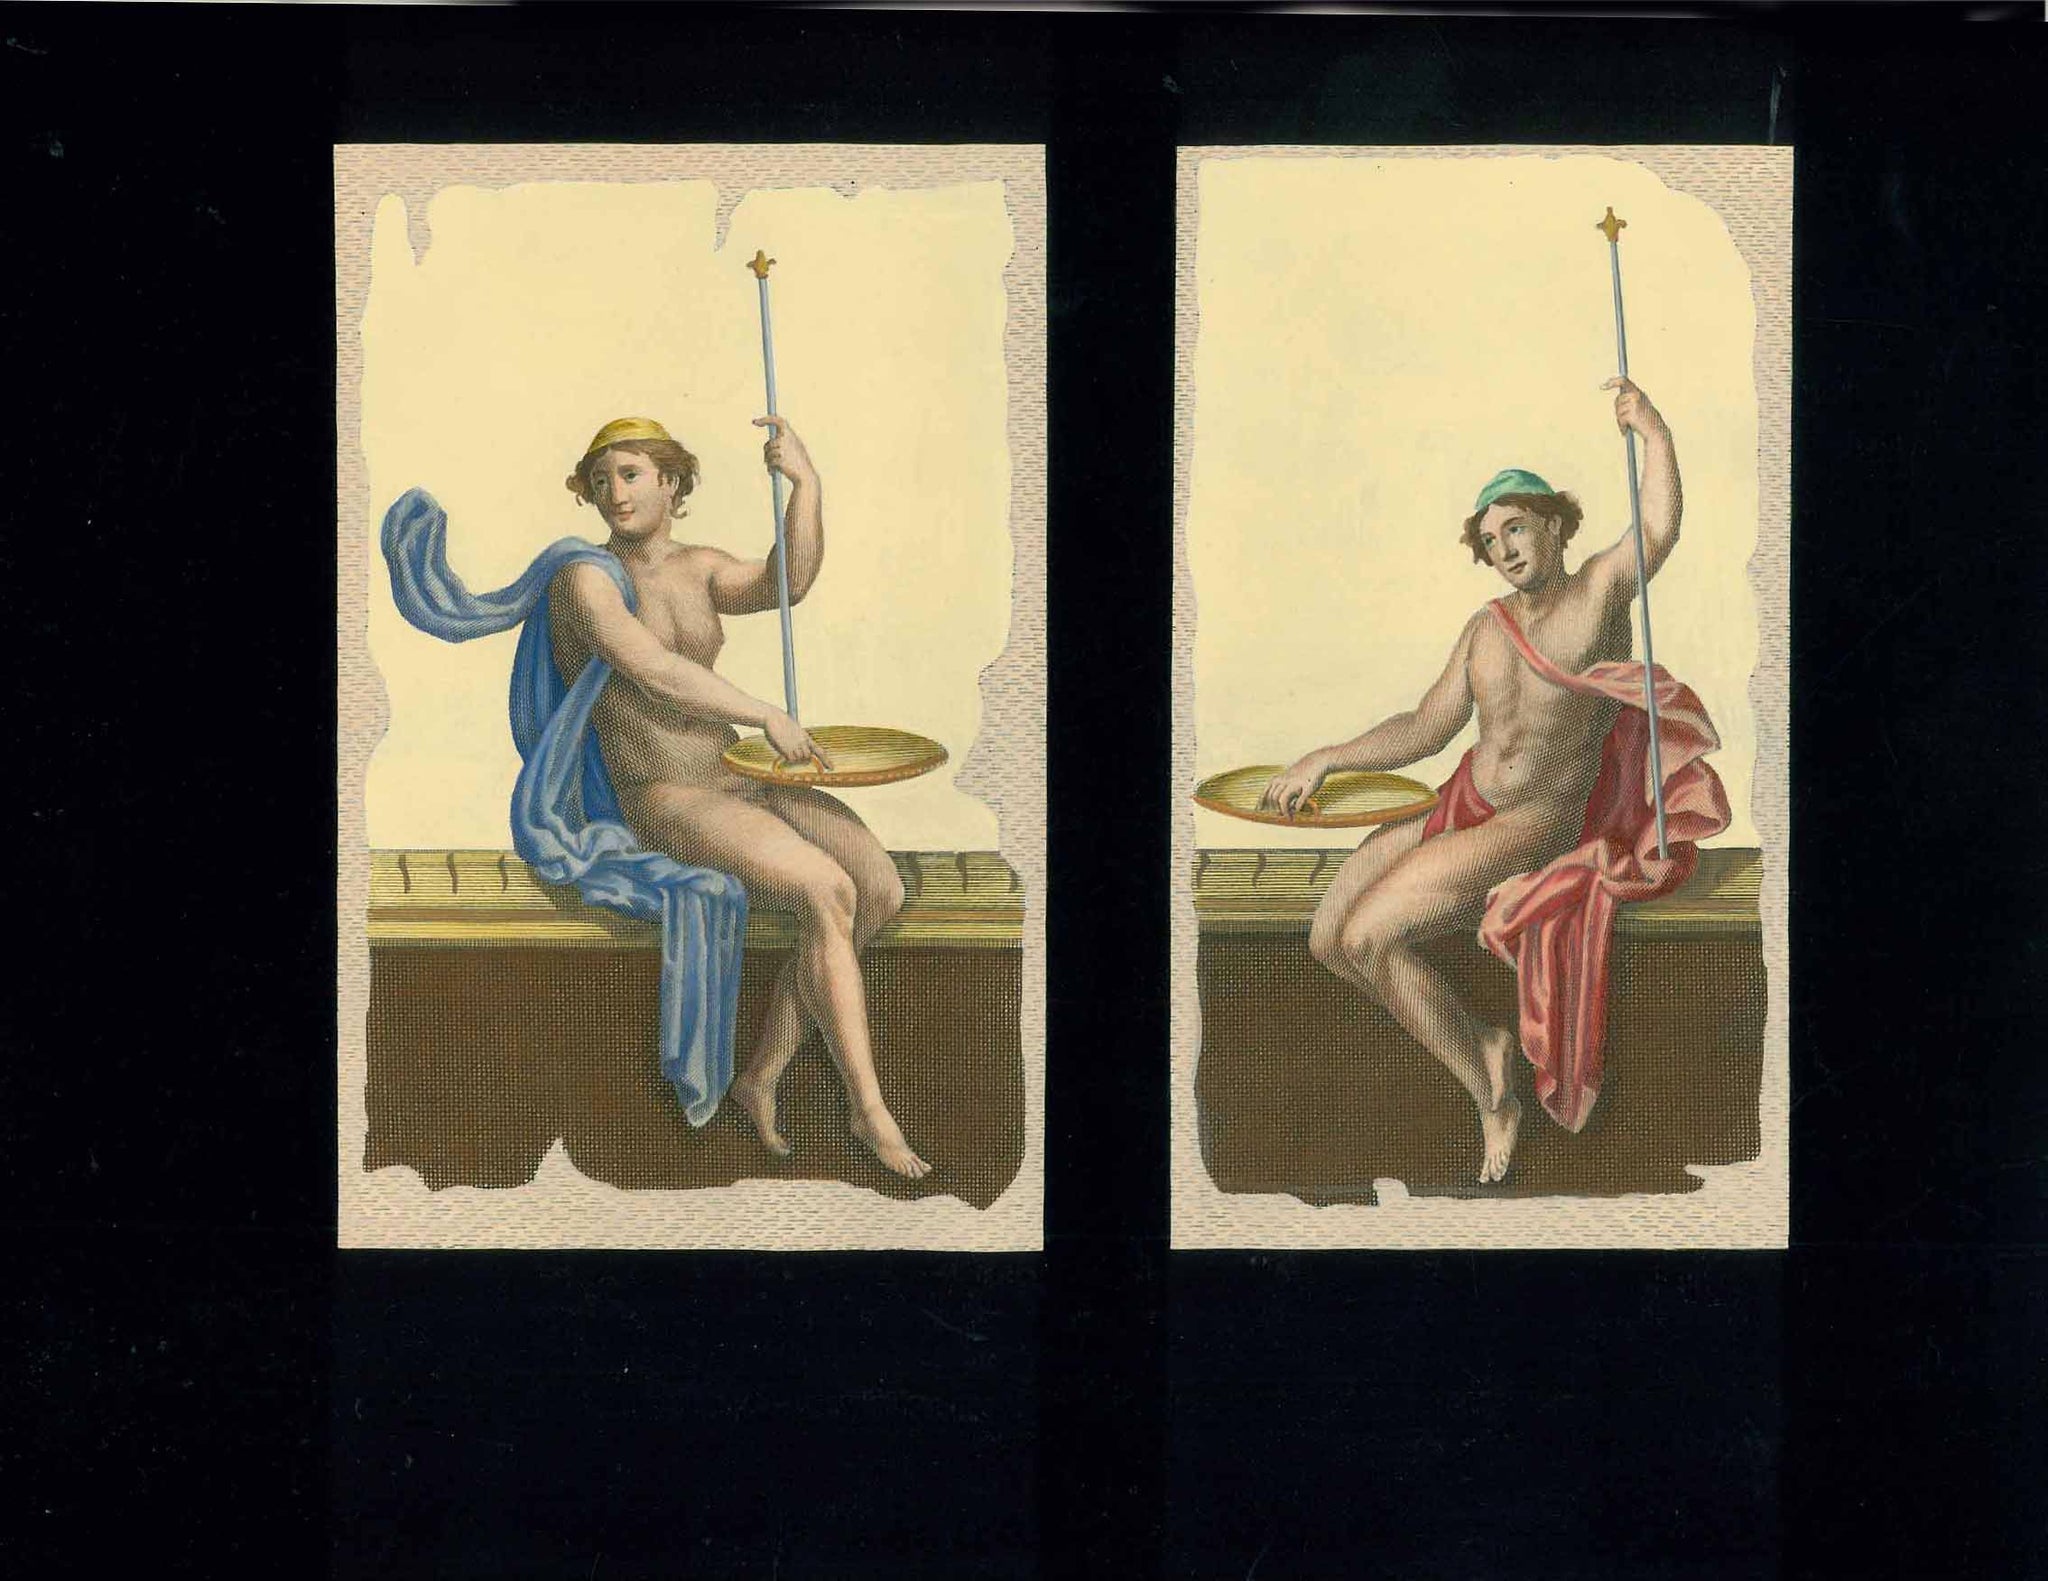 No title. Two separate nude young men sitting on bench.  Anonymous hand-colored (gouache) copper etching.  Published in "Le Antichita di Ercolano esposte"  An 8-volume work on the antiquities found during the excavations of Herculaneum.  Naples, 1757-1792